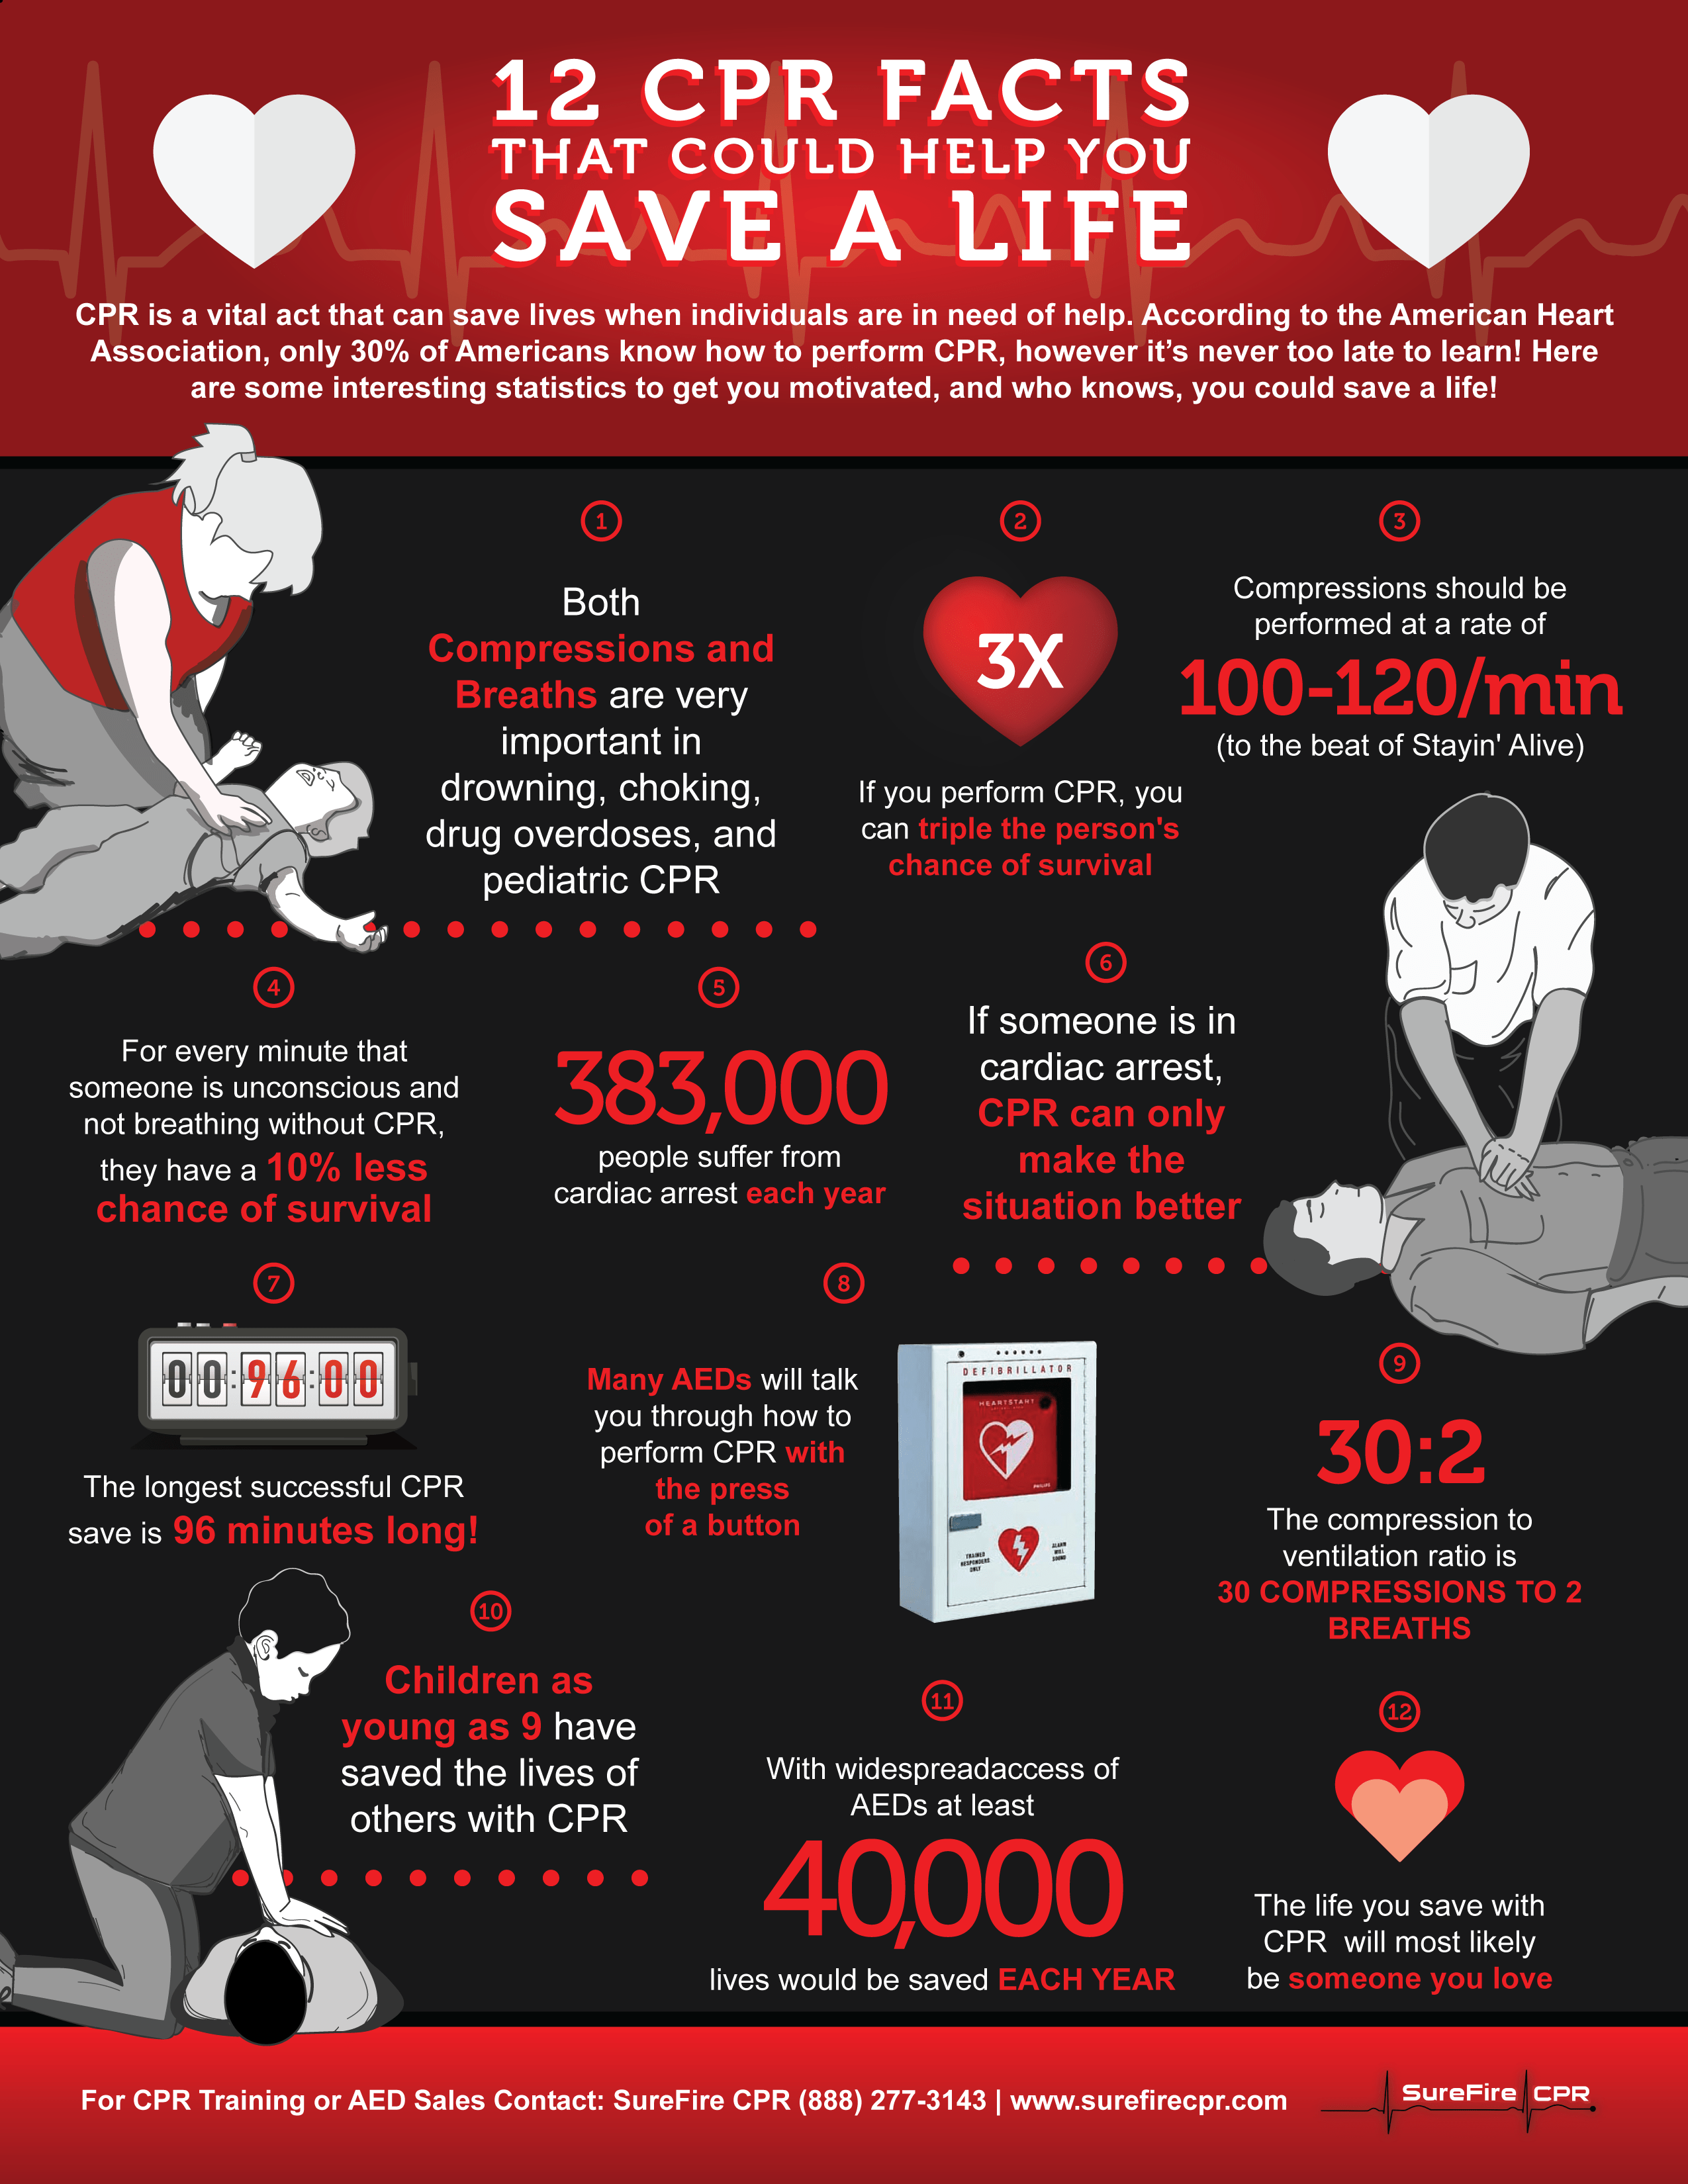 12 CPR Facts That Could Help You Save a Life